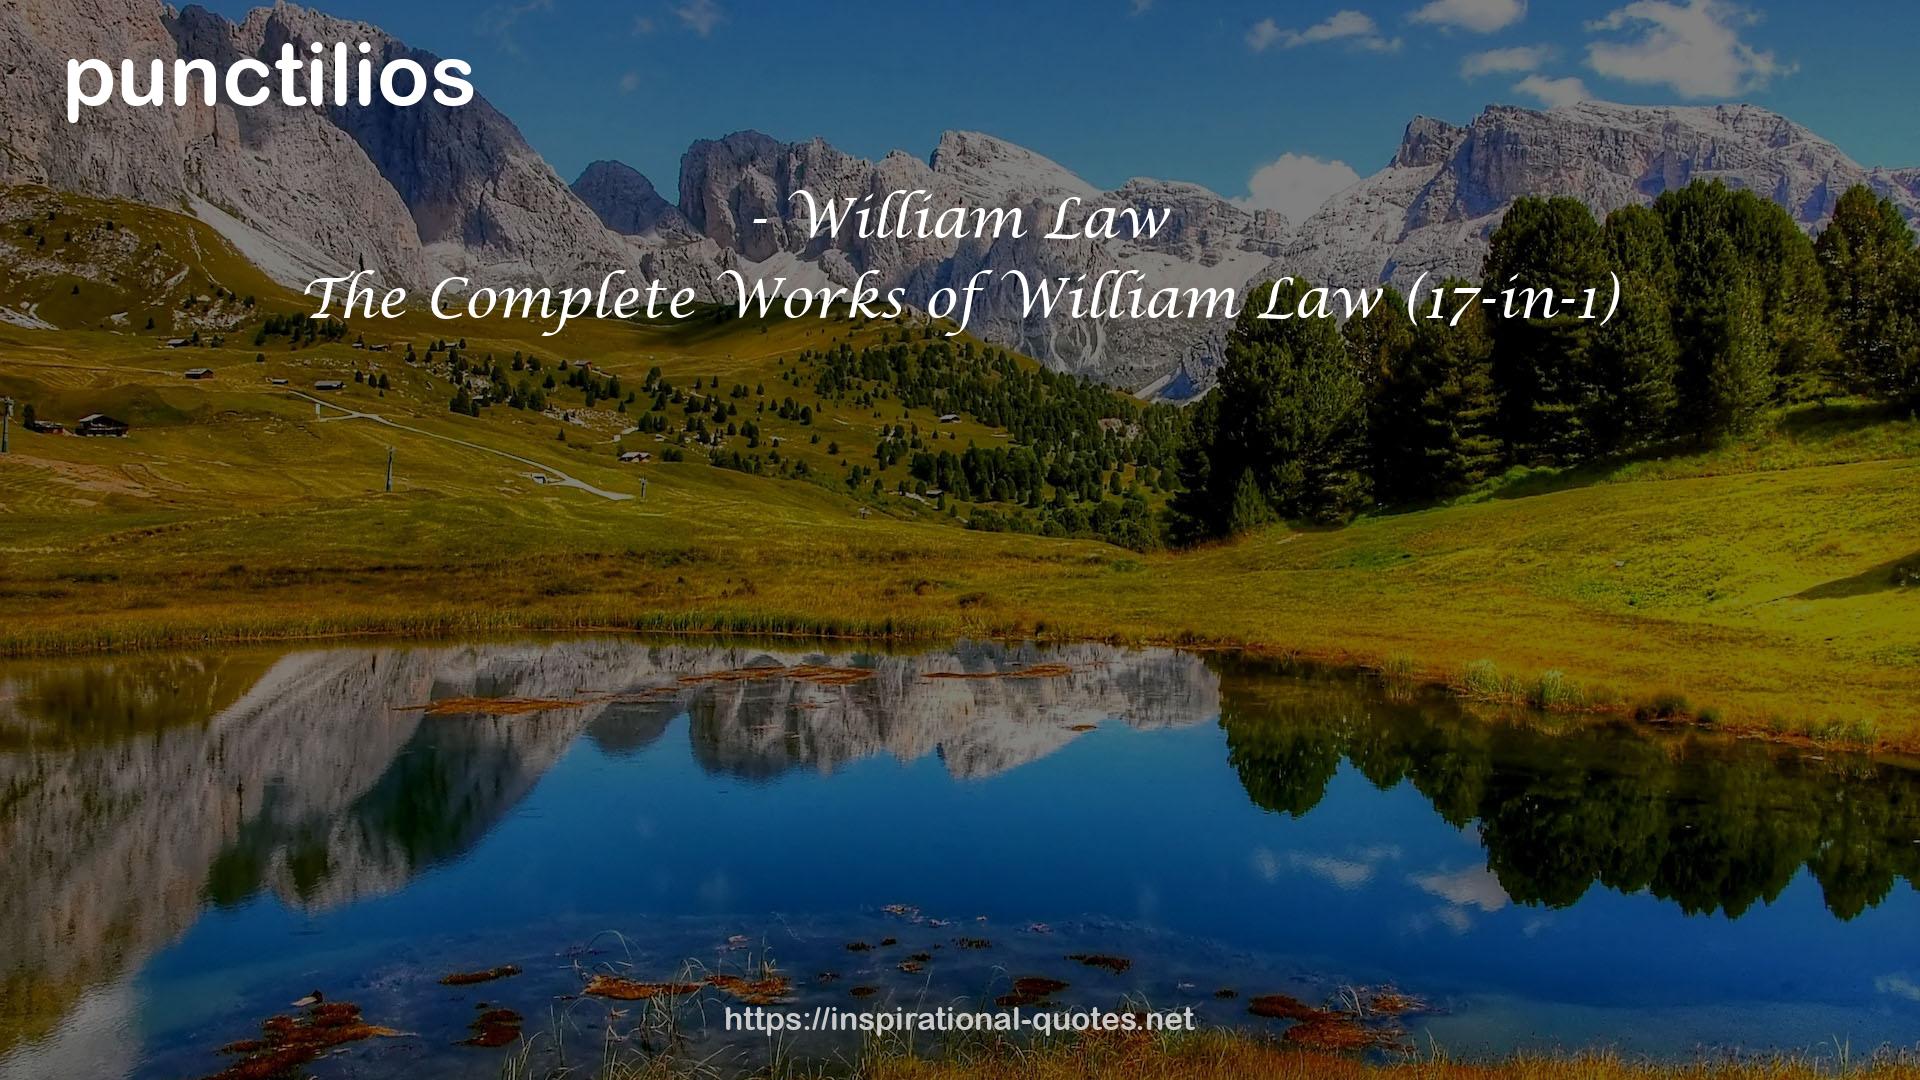 The Complete Works of William Law (17-in-1) QUOTES